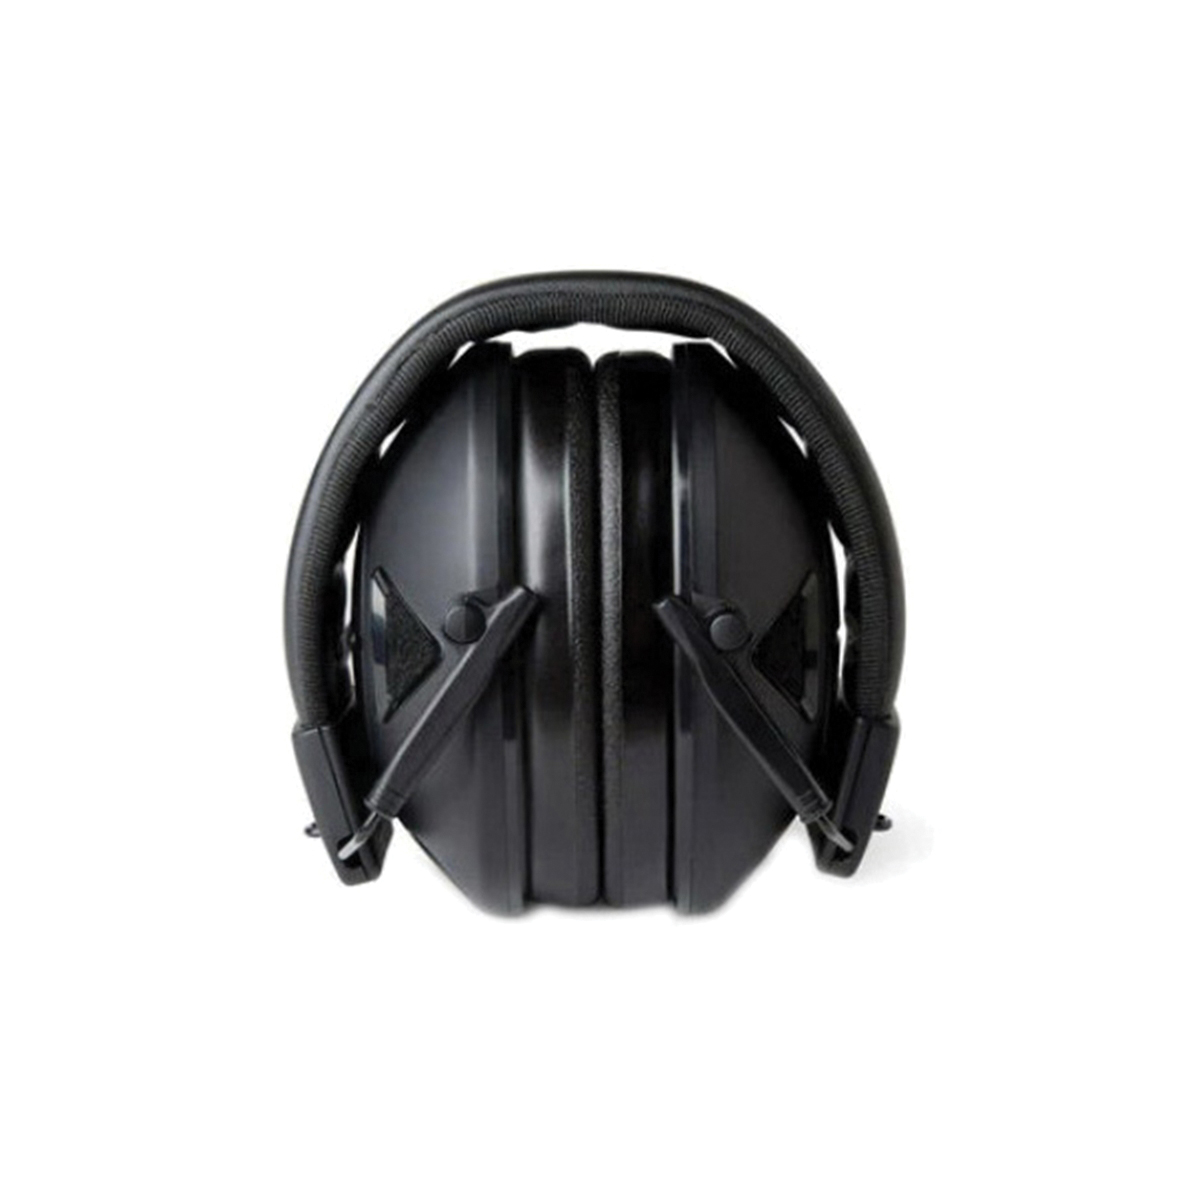 PELTOR Tactical 100 Series TAC100-OTH Electronic Hearing Protector Ear Muffs, 22 dB NRR, Black - 4